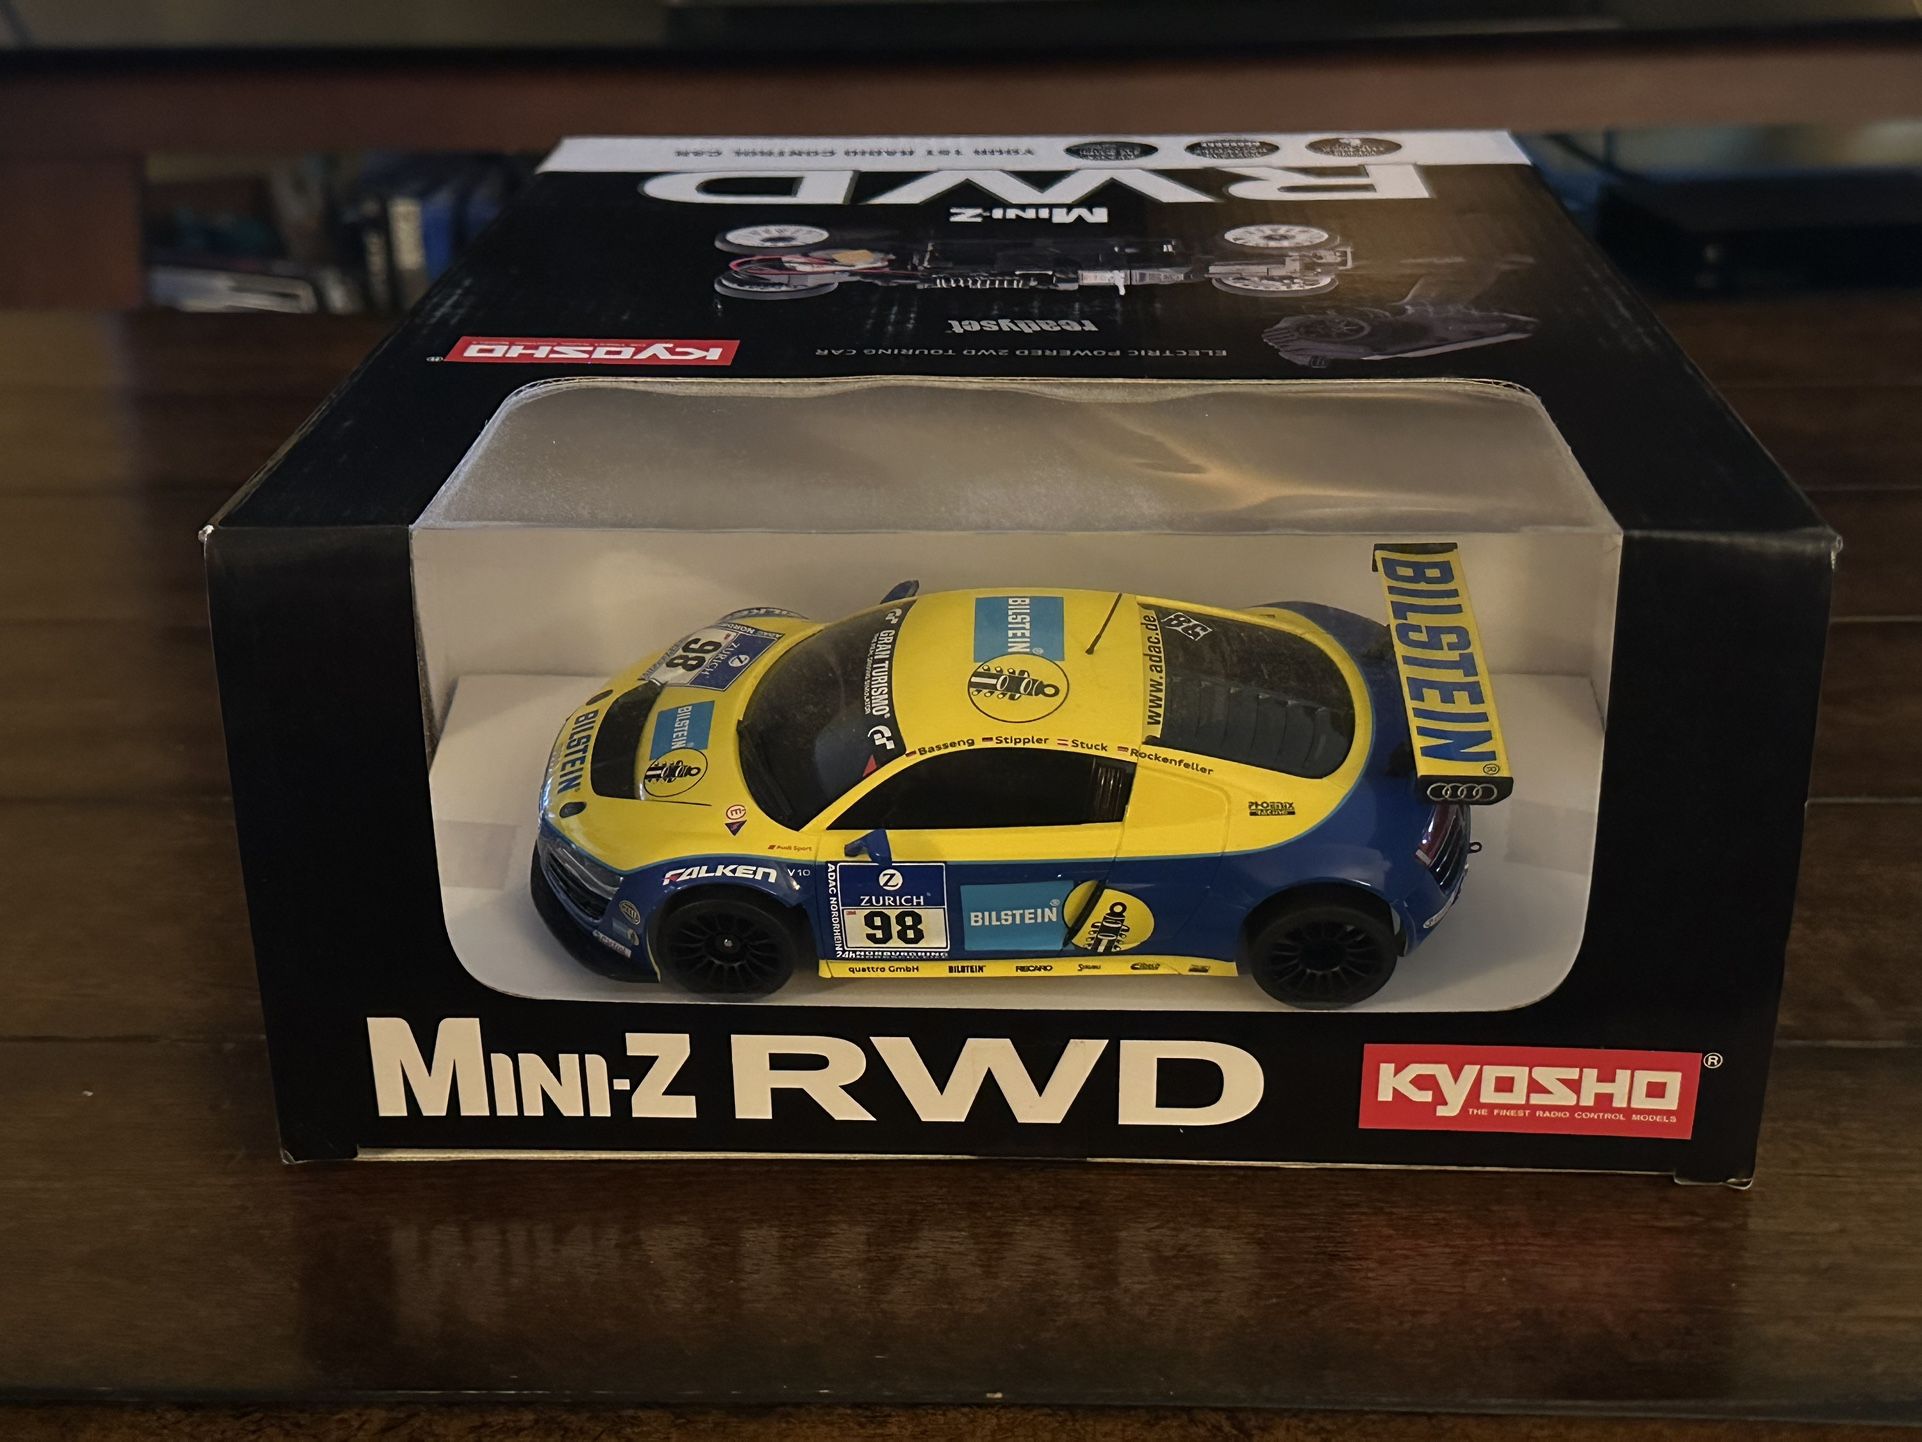 Kyosho Mini Z RWD, Audi R8, Brand New in the box, never opened.  $220